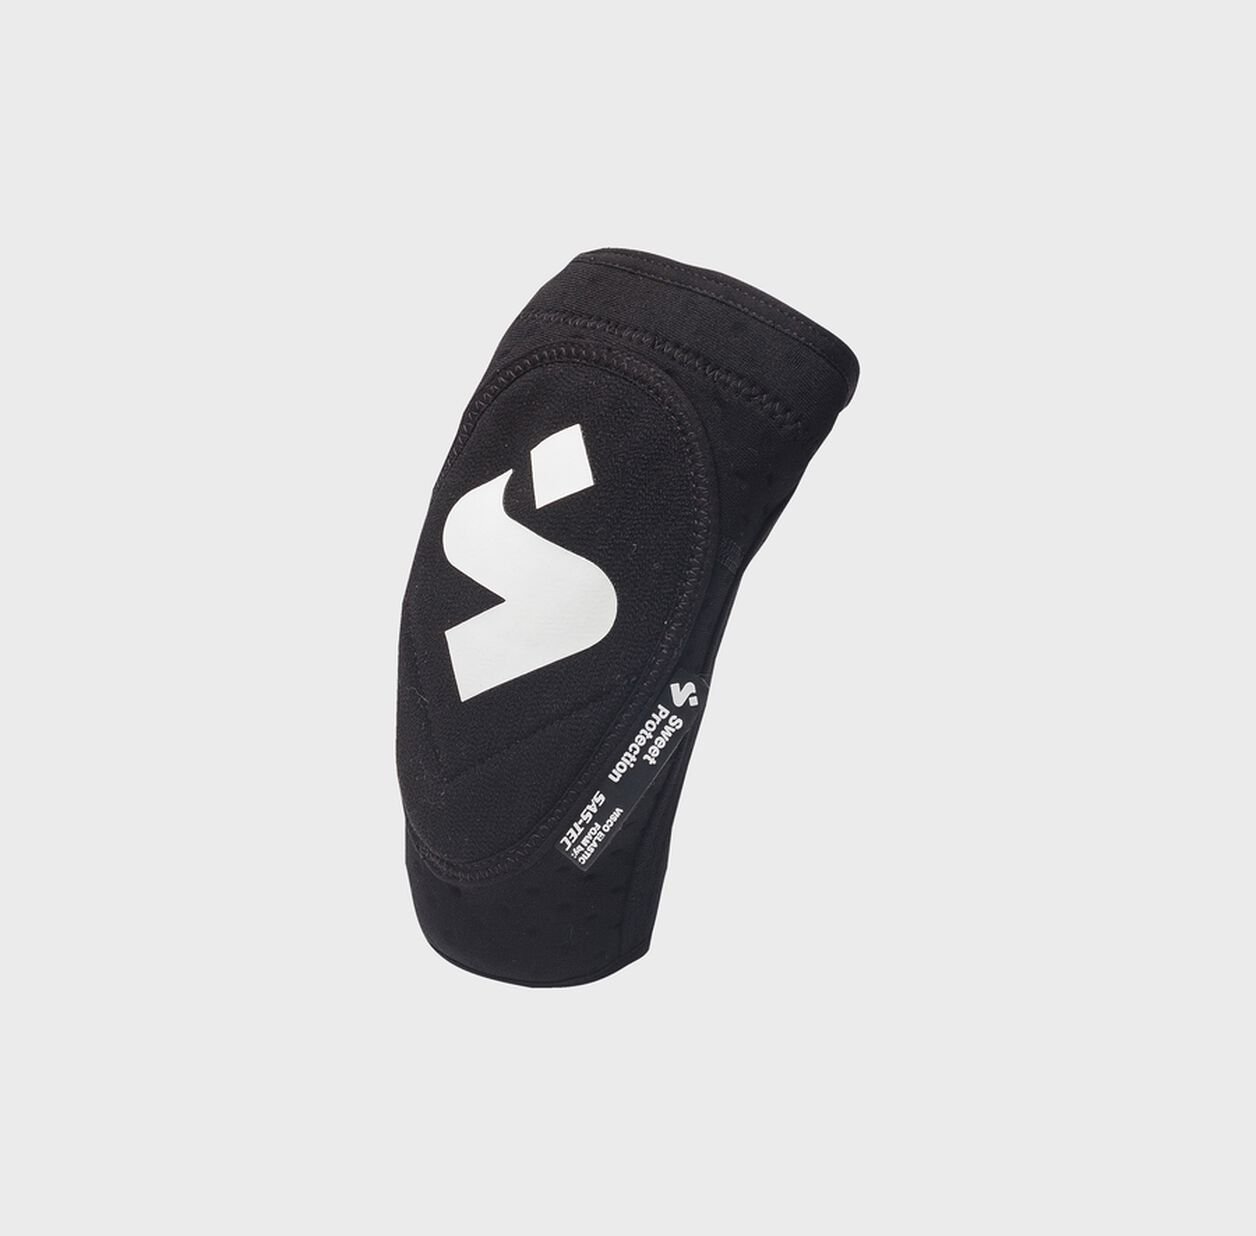 Sweet Protection Elbow Guards JR